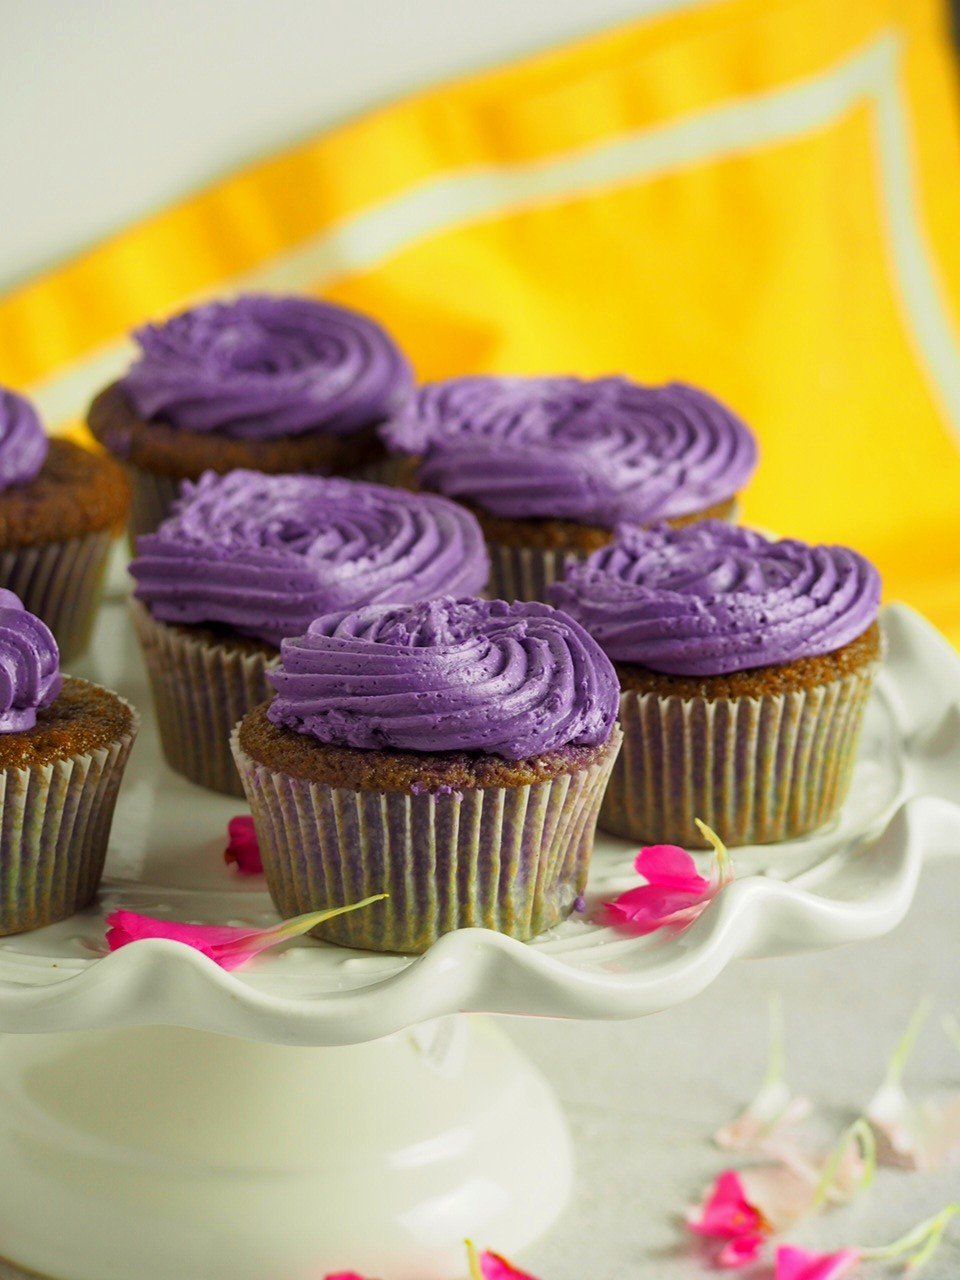 Ube cupcakes ready for serving.